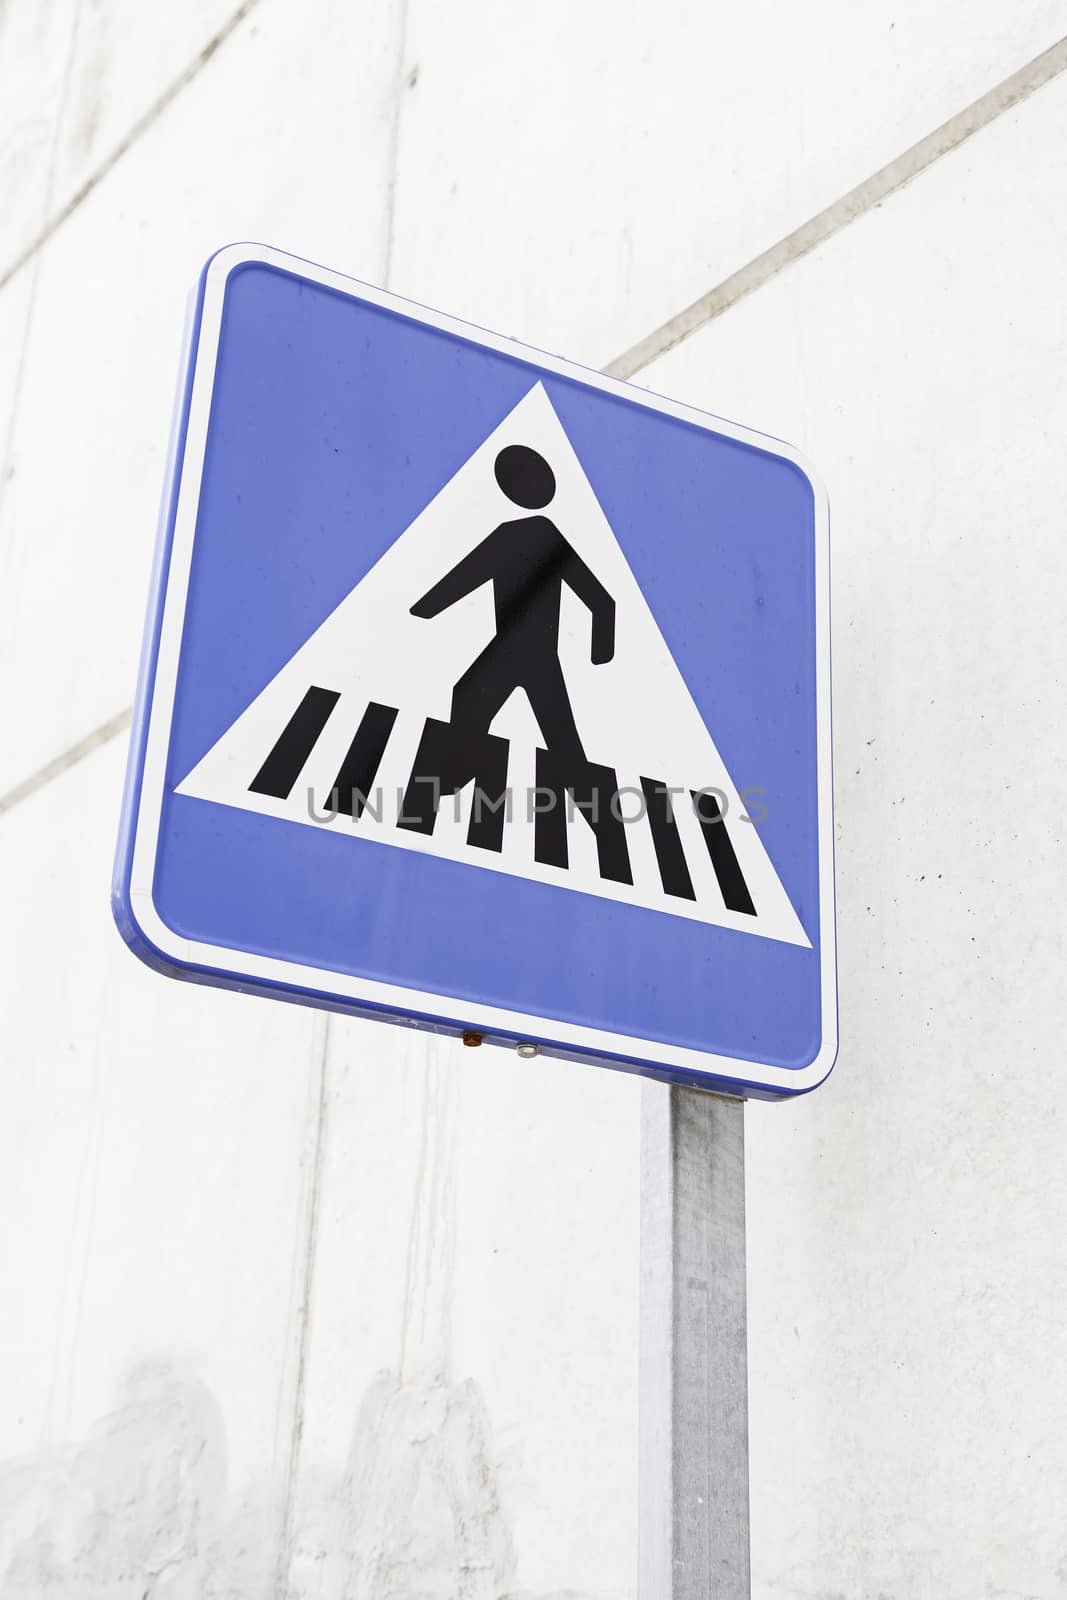 Sign of a zebra crossing, detail of an information signal on the street, caution and information